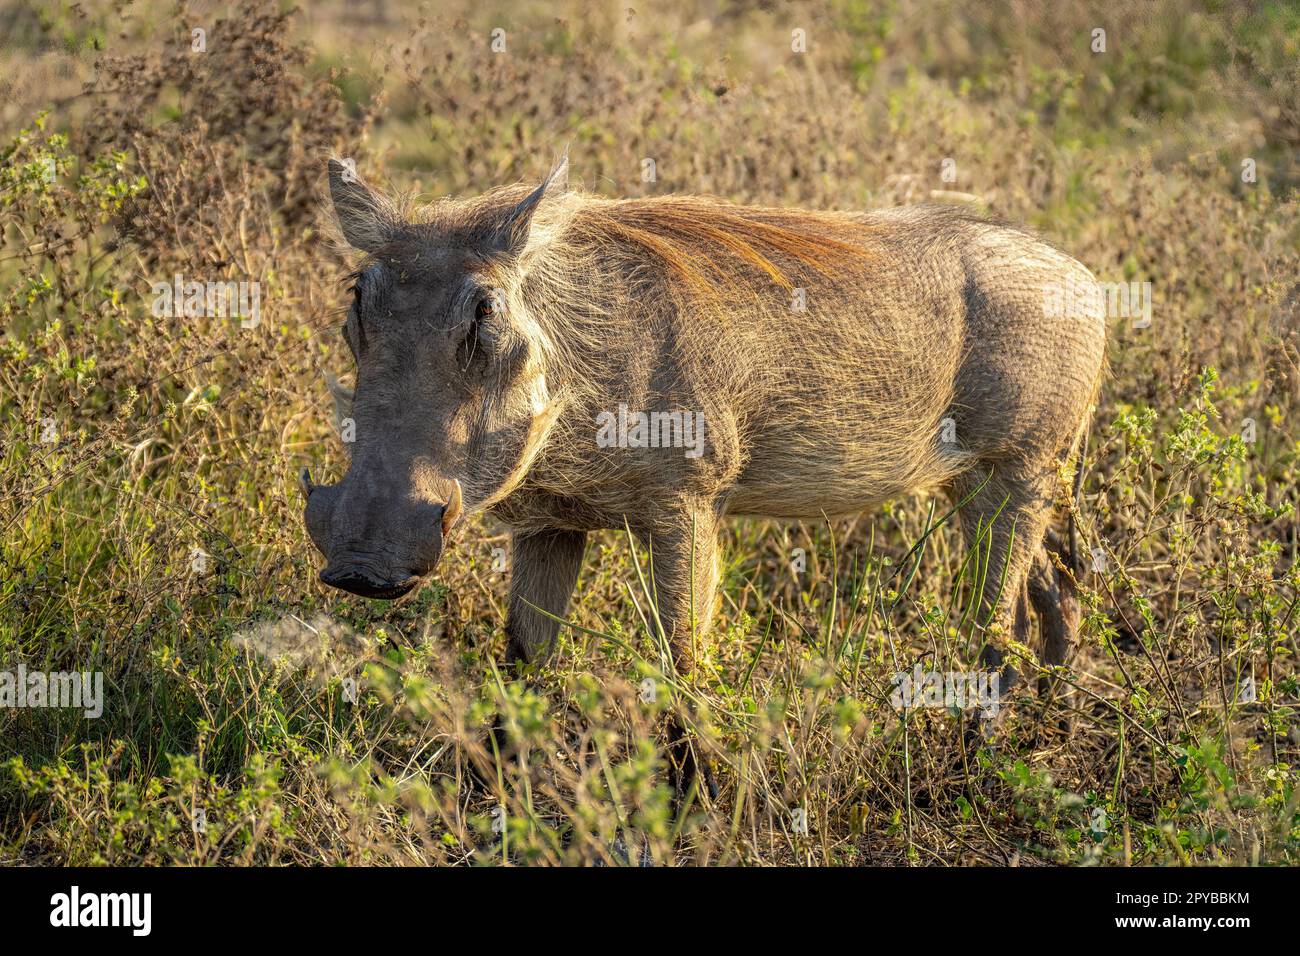 Common warthog stands in grass eyeing lens Stock Photo